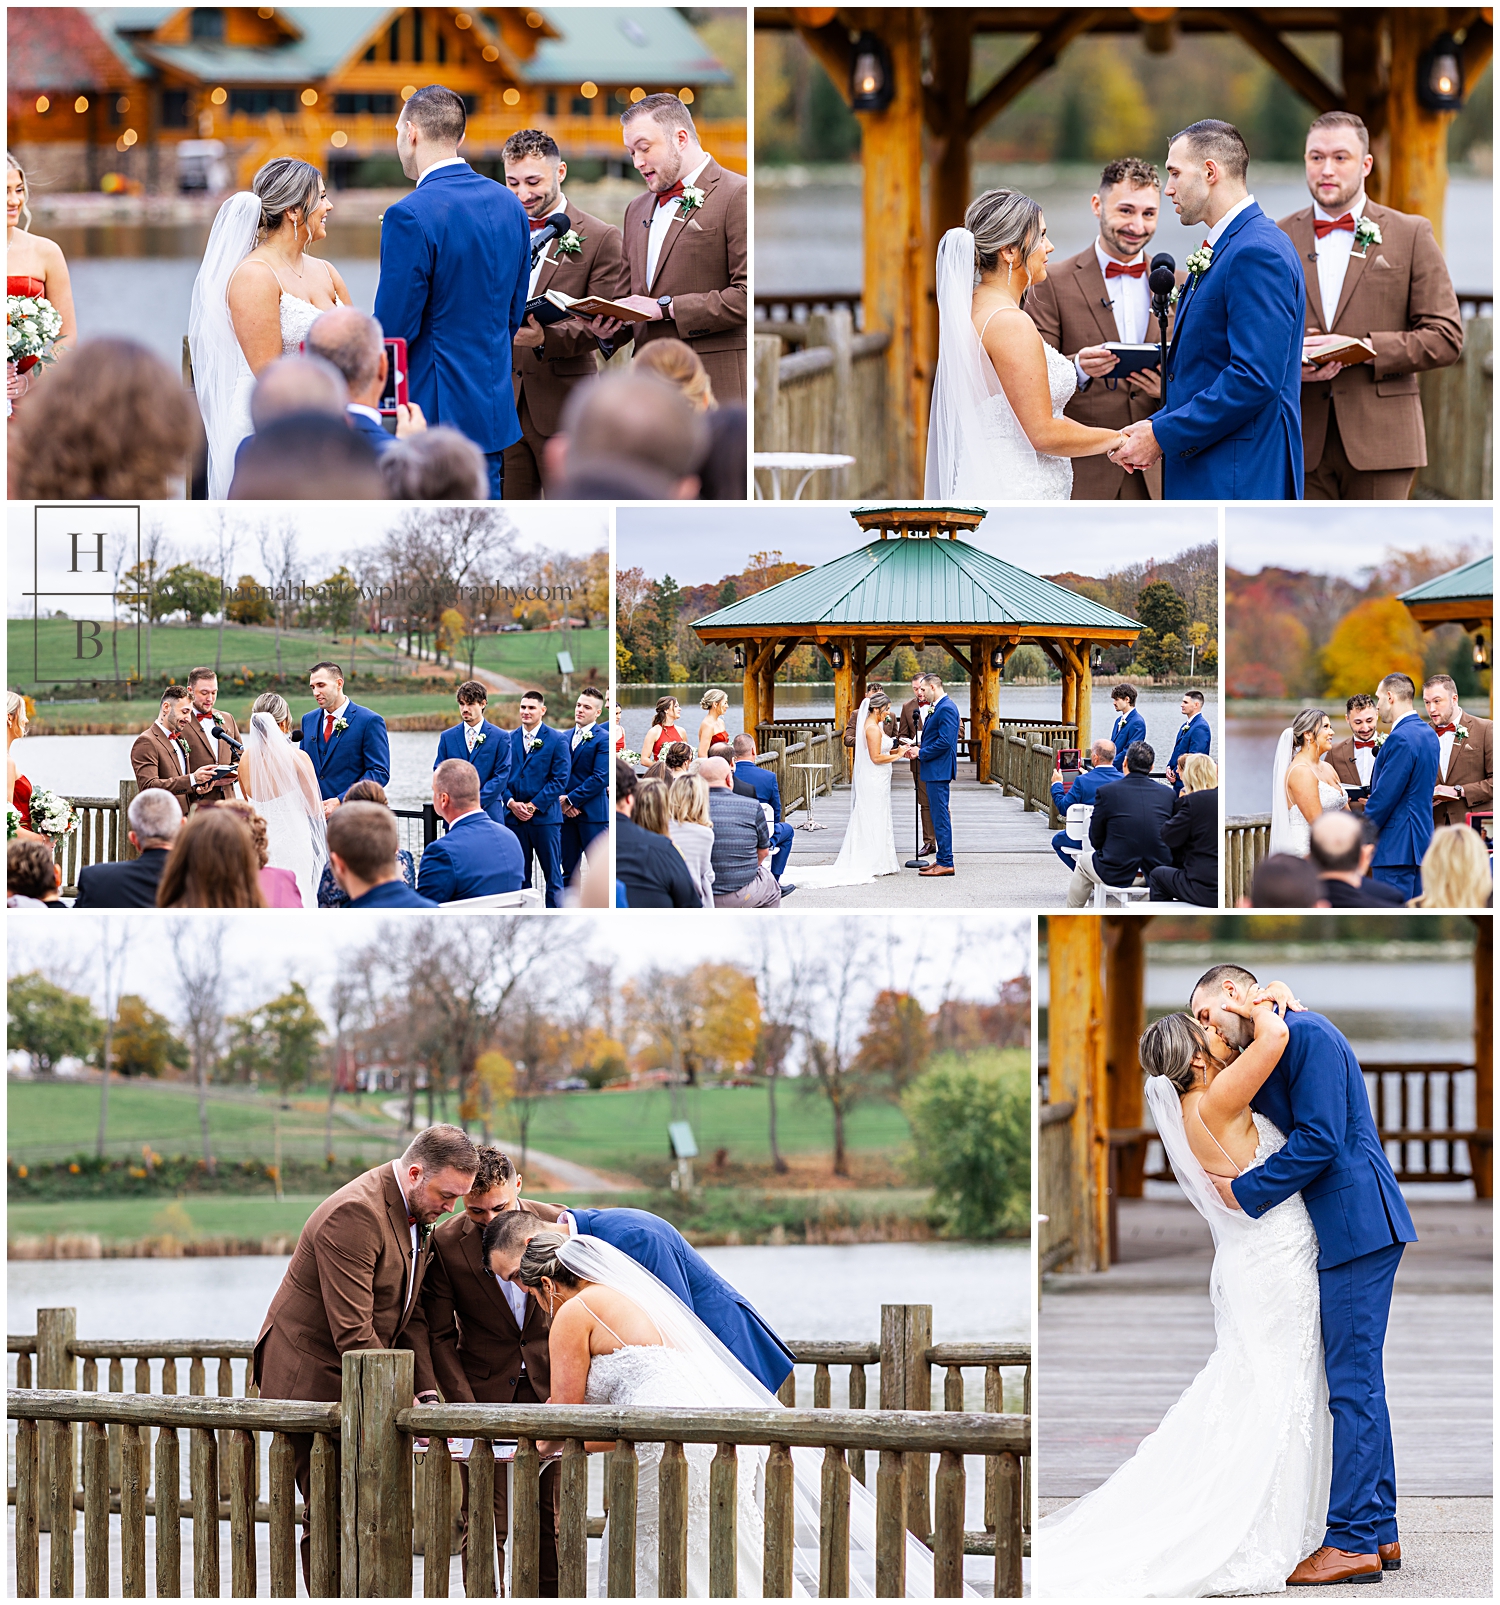 Wedding ceremony collage at the gathering place at Darlington Lake.